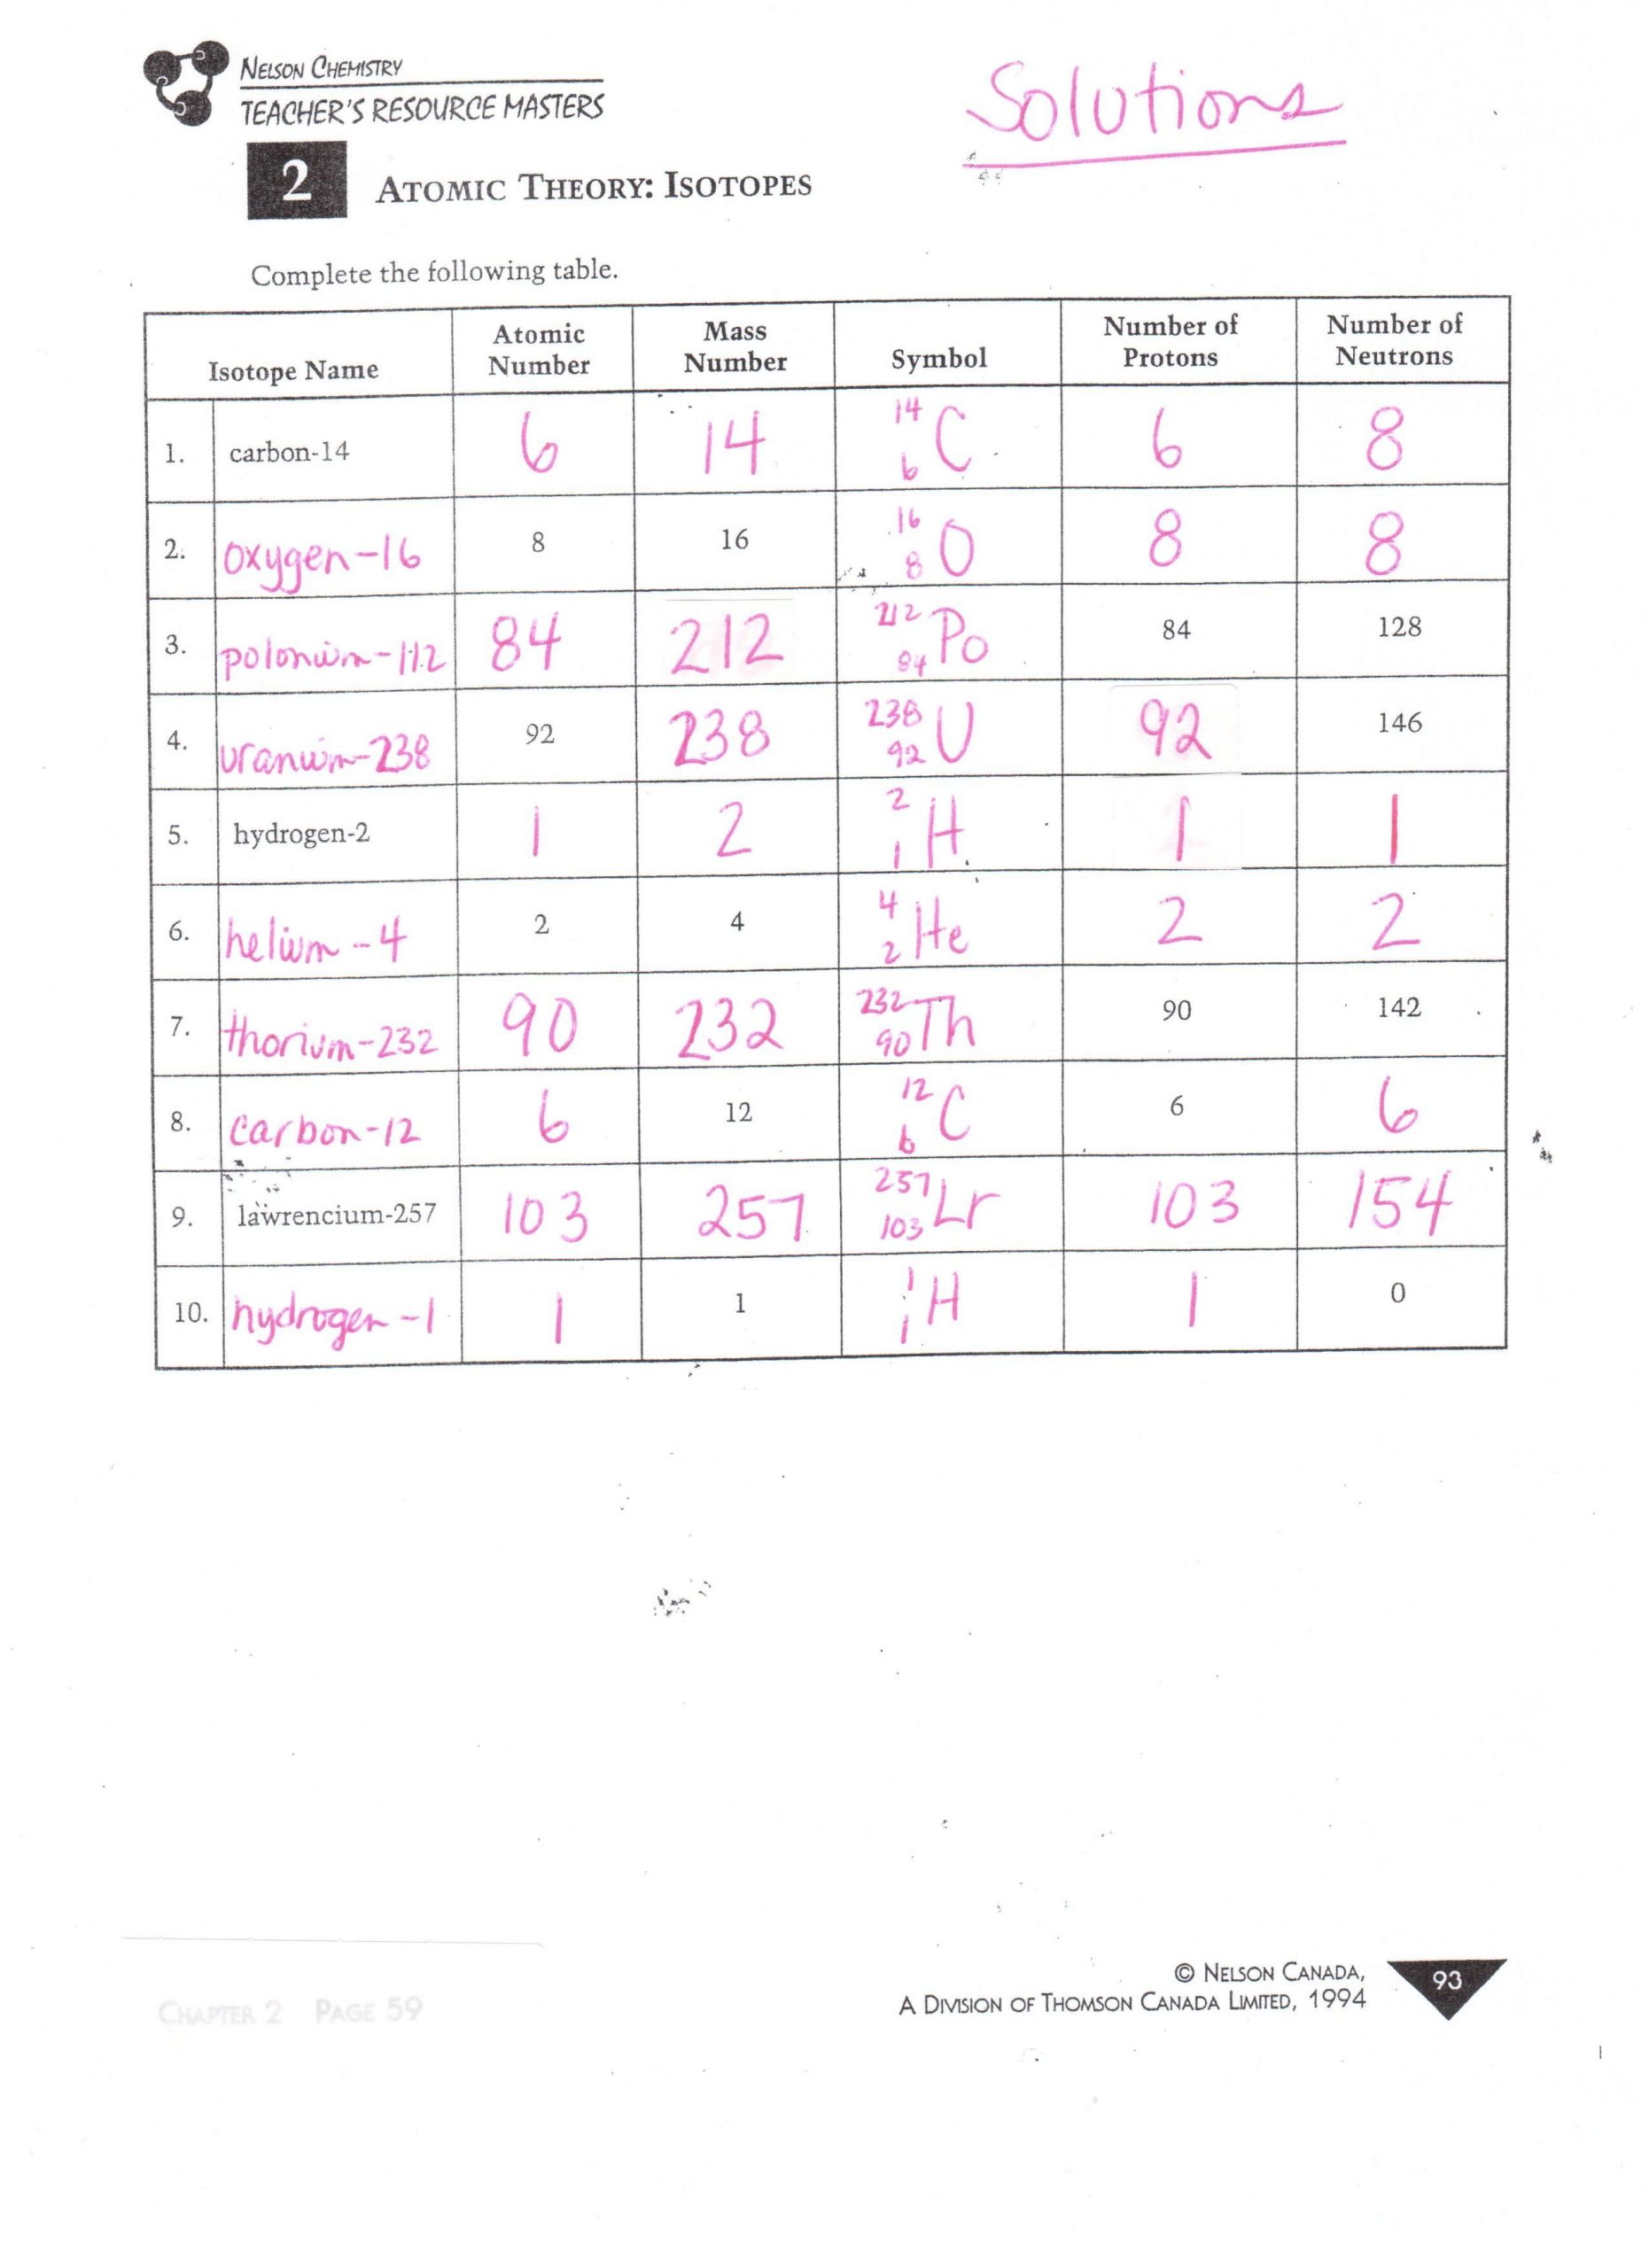 Atoms and isotopes Worksheet Answers Kids isotopes Worksheet Ions isotopes